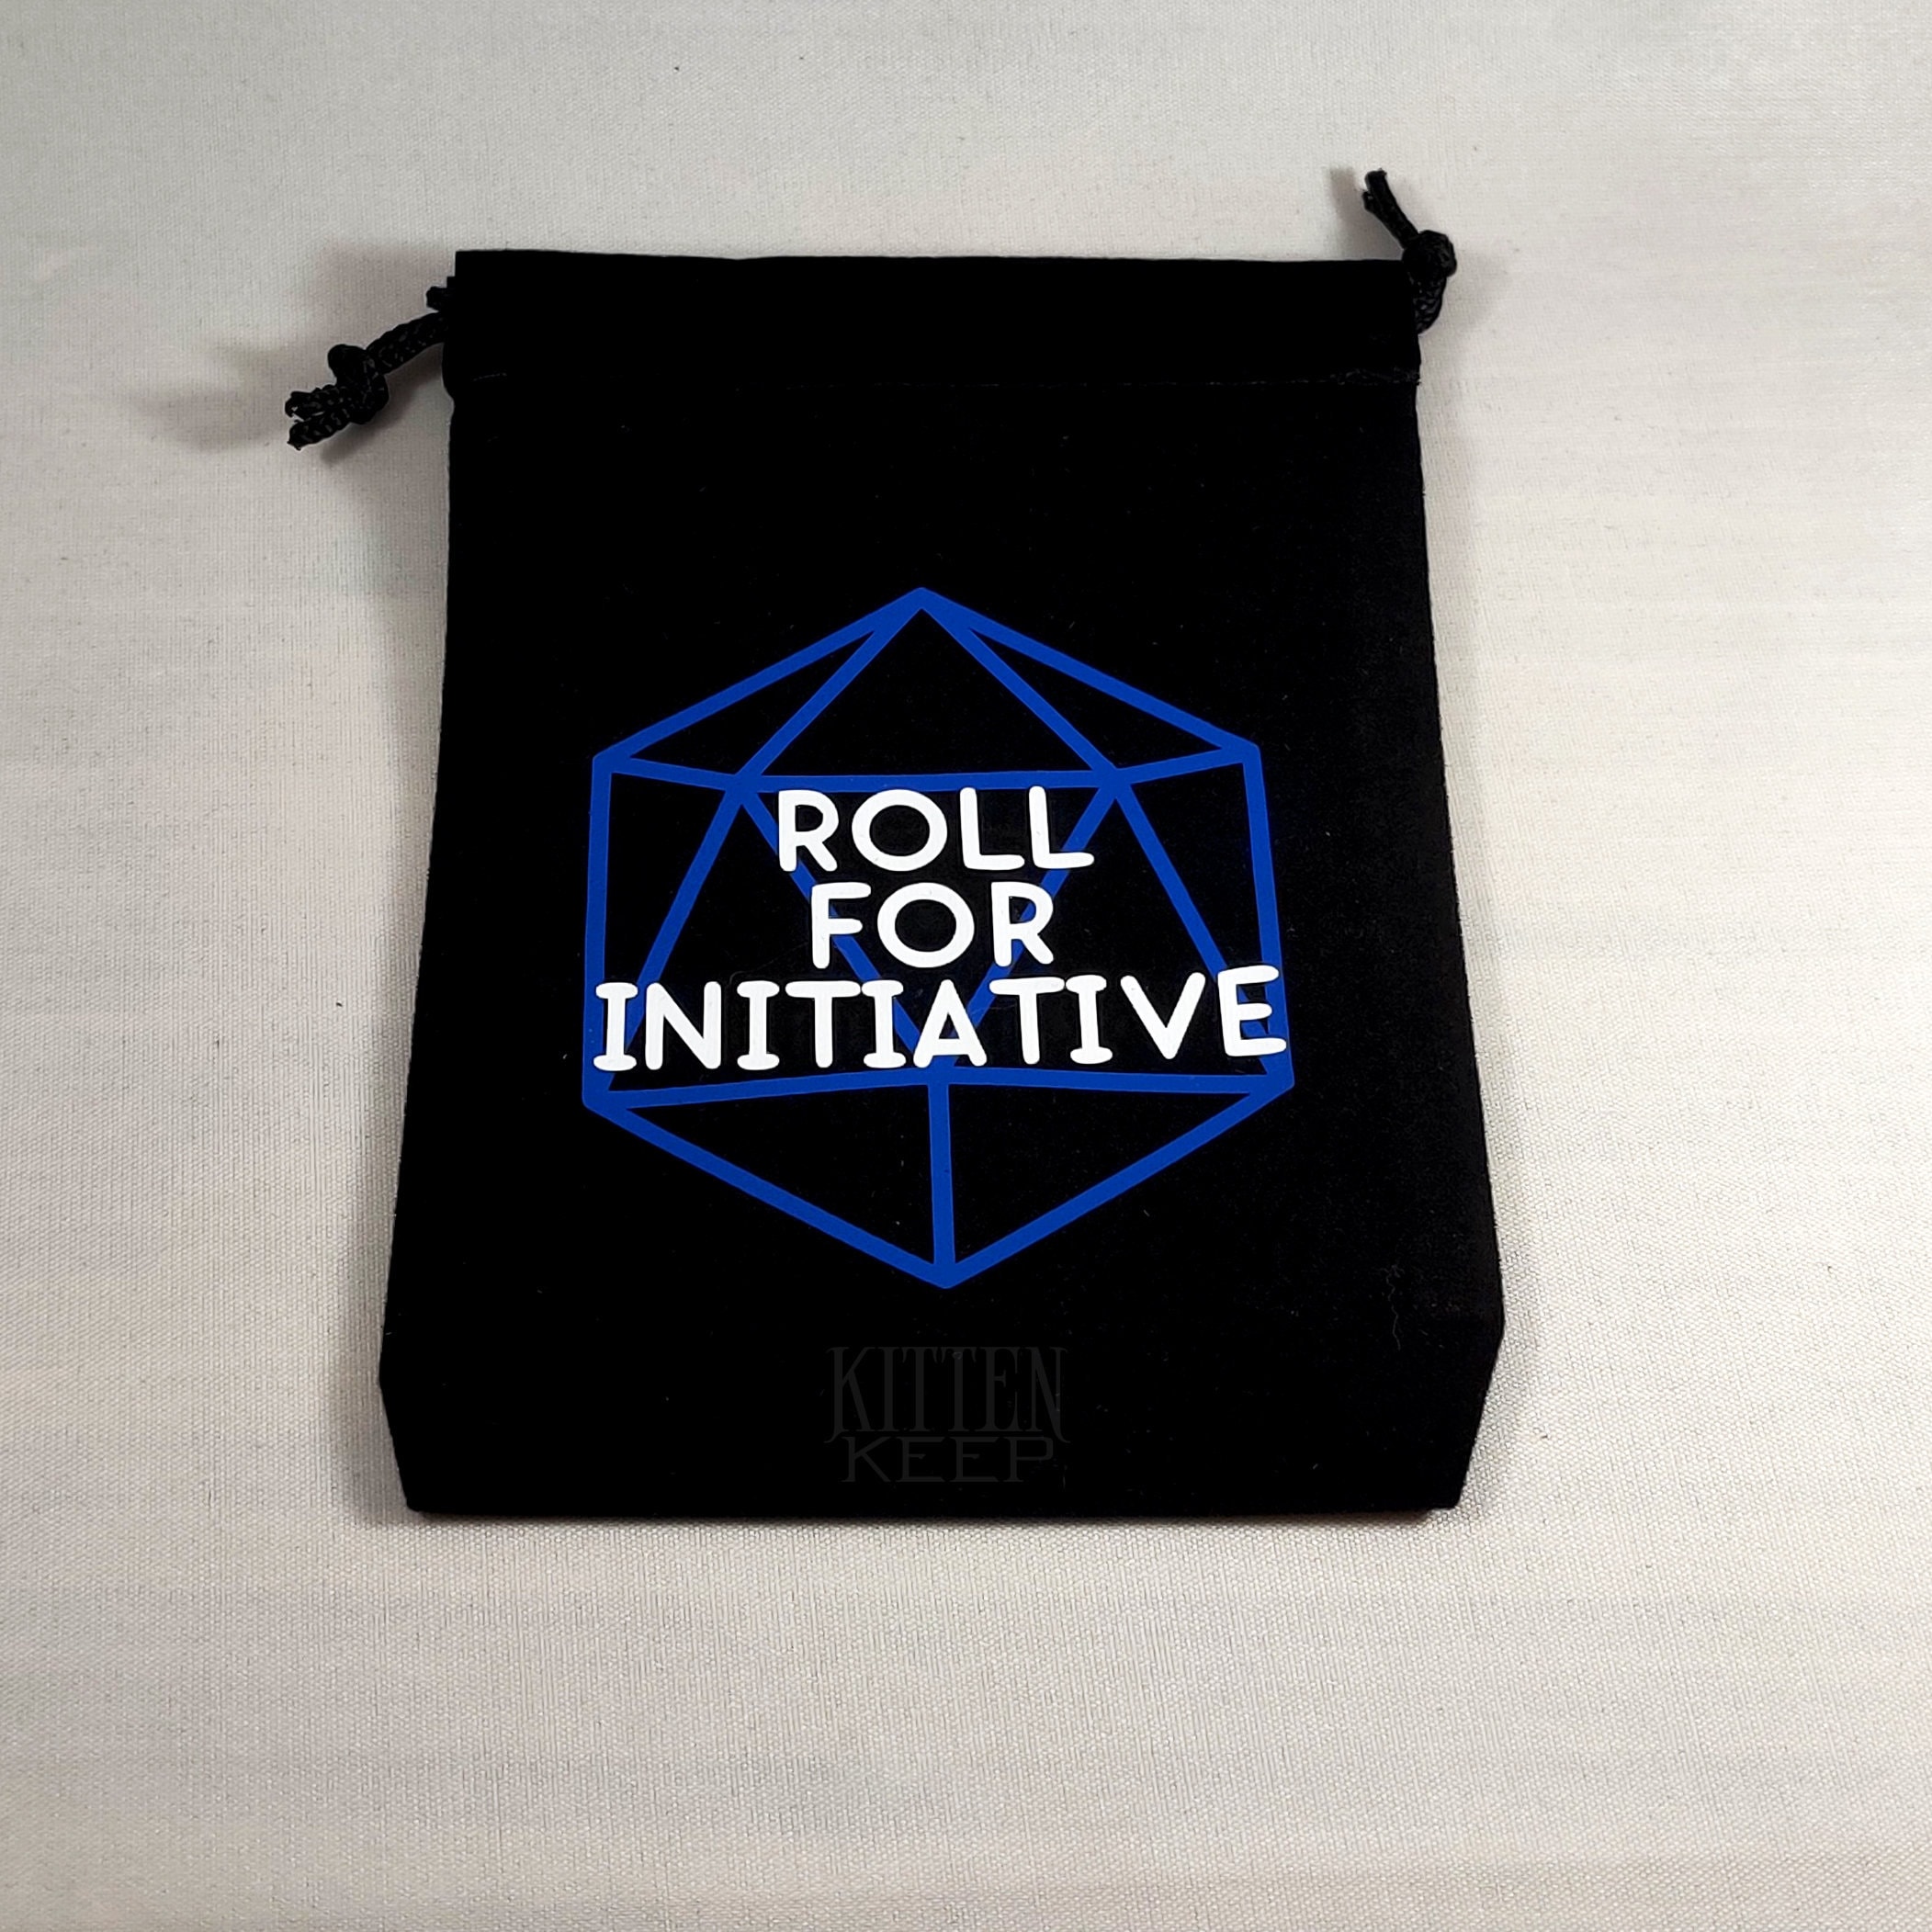 Roll For Initiative Dice Bag